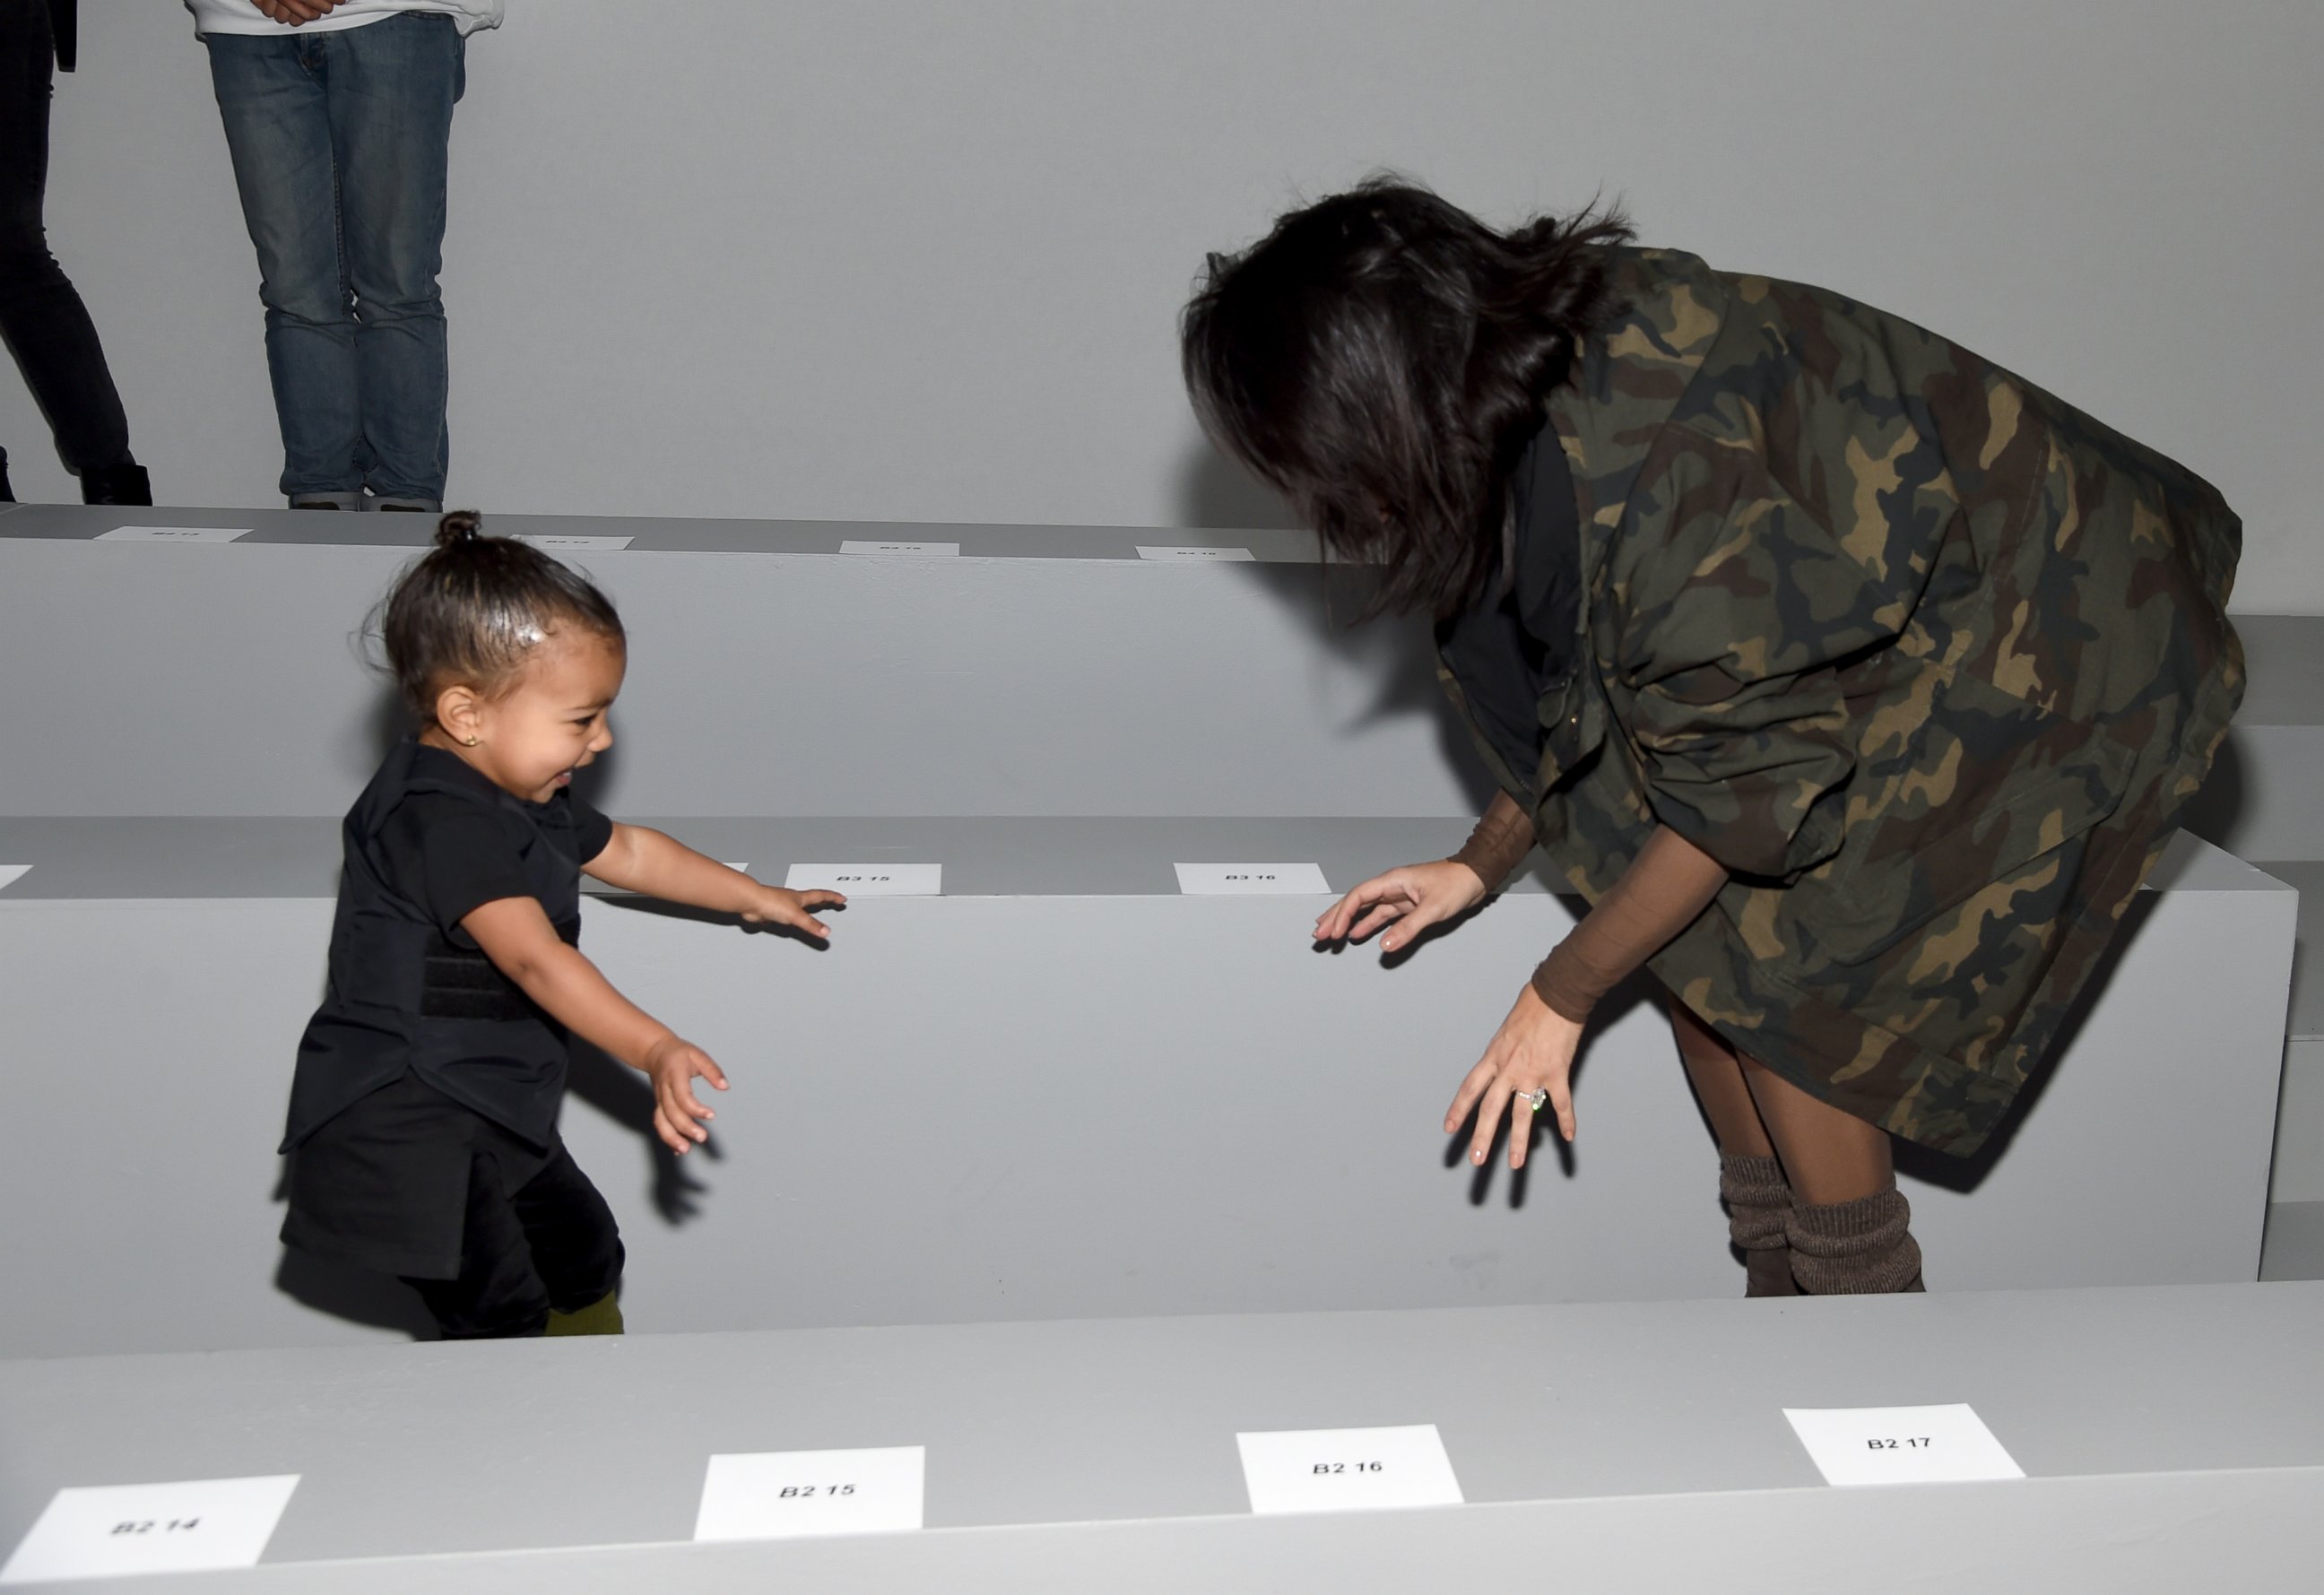 PHOTO: Kim Kardashian and daughter North attend the adidas Originals x Kanye West YEEZY SEASON 1 fashion show during New York Fashion Week Fall 2015 at Skylight Clarkson Sq., Feb. 12, 2015 in New York.